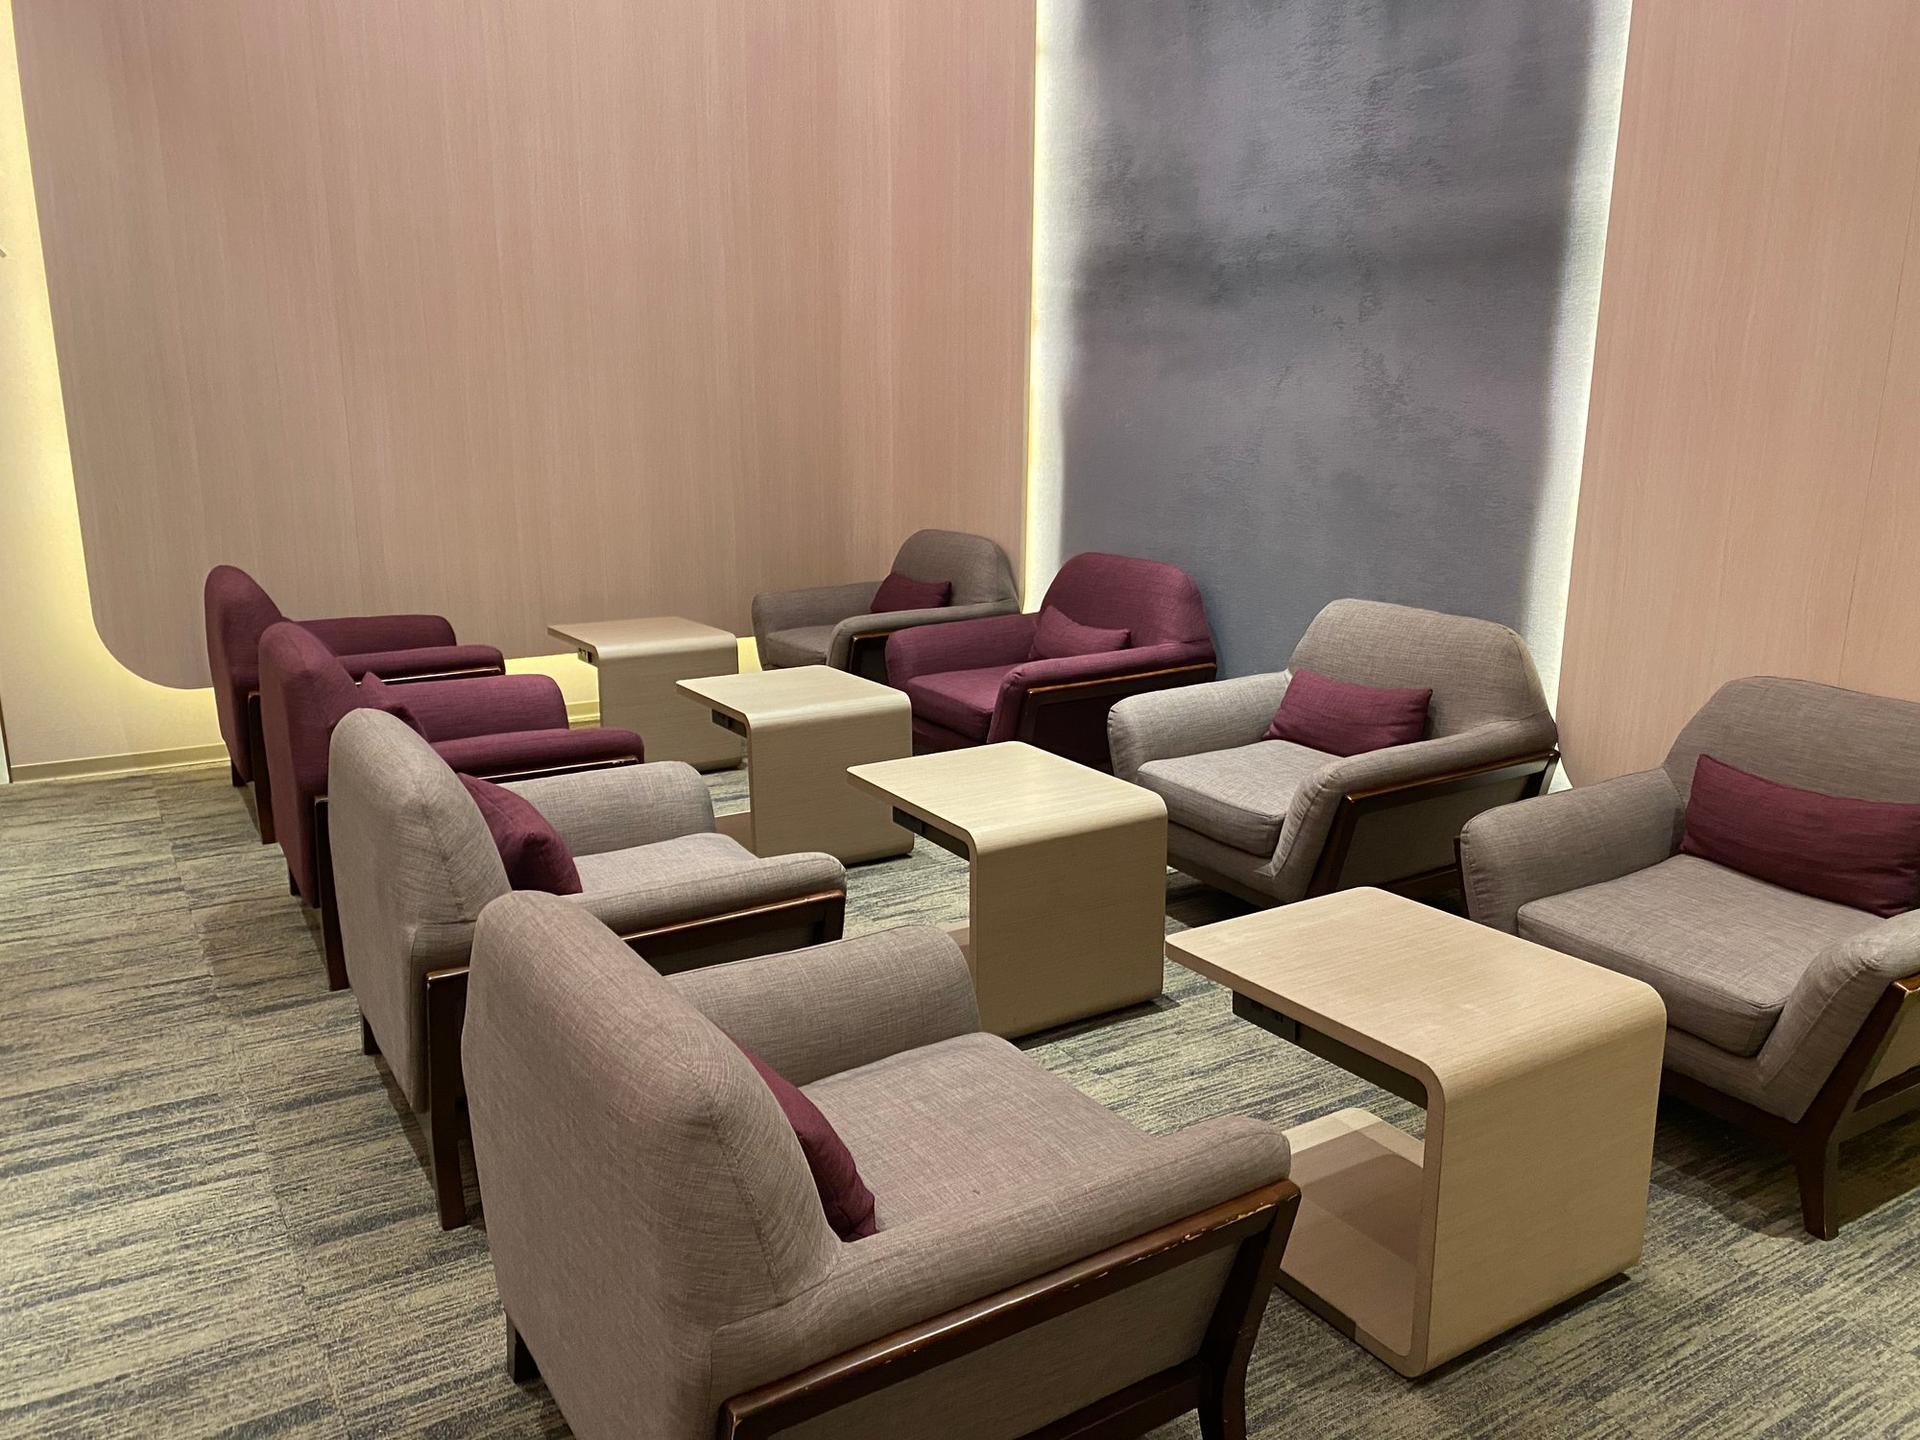 China Airlines Lounge (V2) image 10 of 20